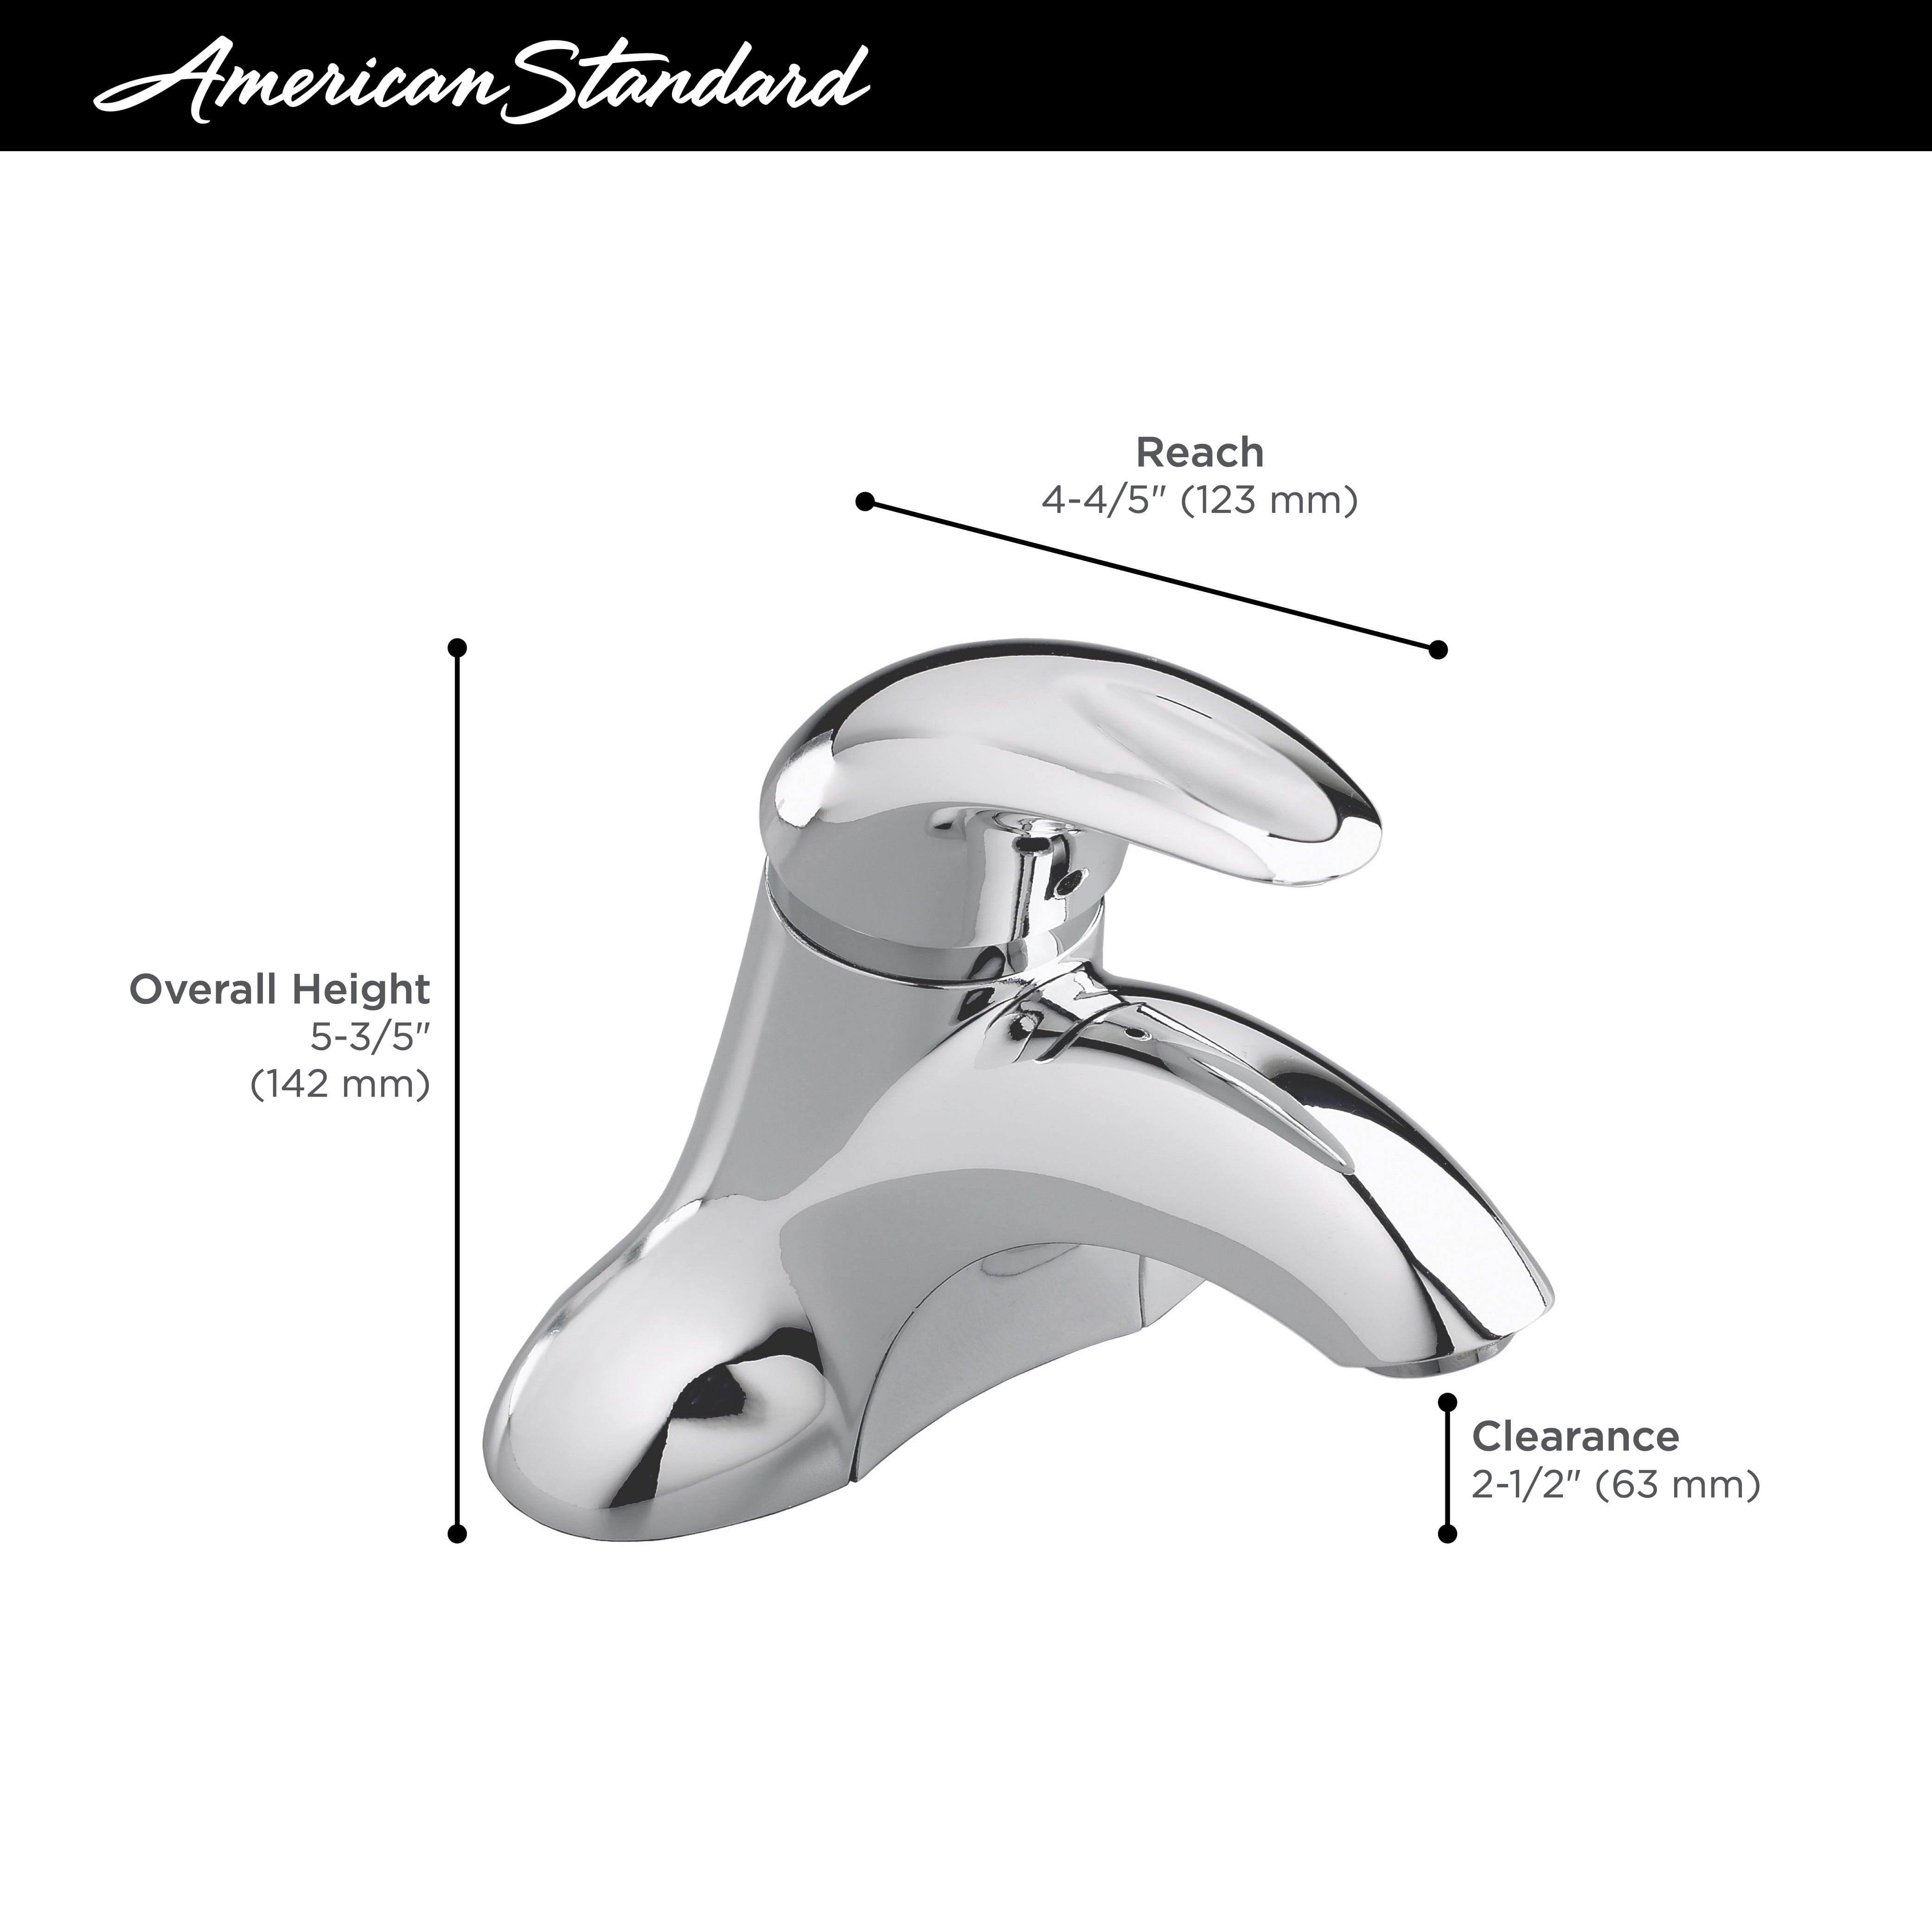 Reliant 3 4 Inch Centerset Single Handle Bathroom Faucet 12 gpm 45 L min With Lever Handle BRUSHED NICKEL